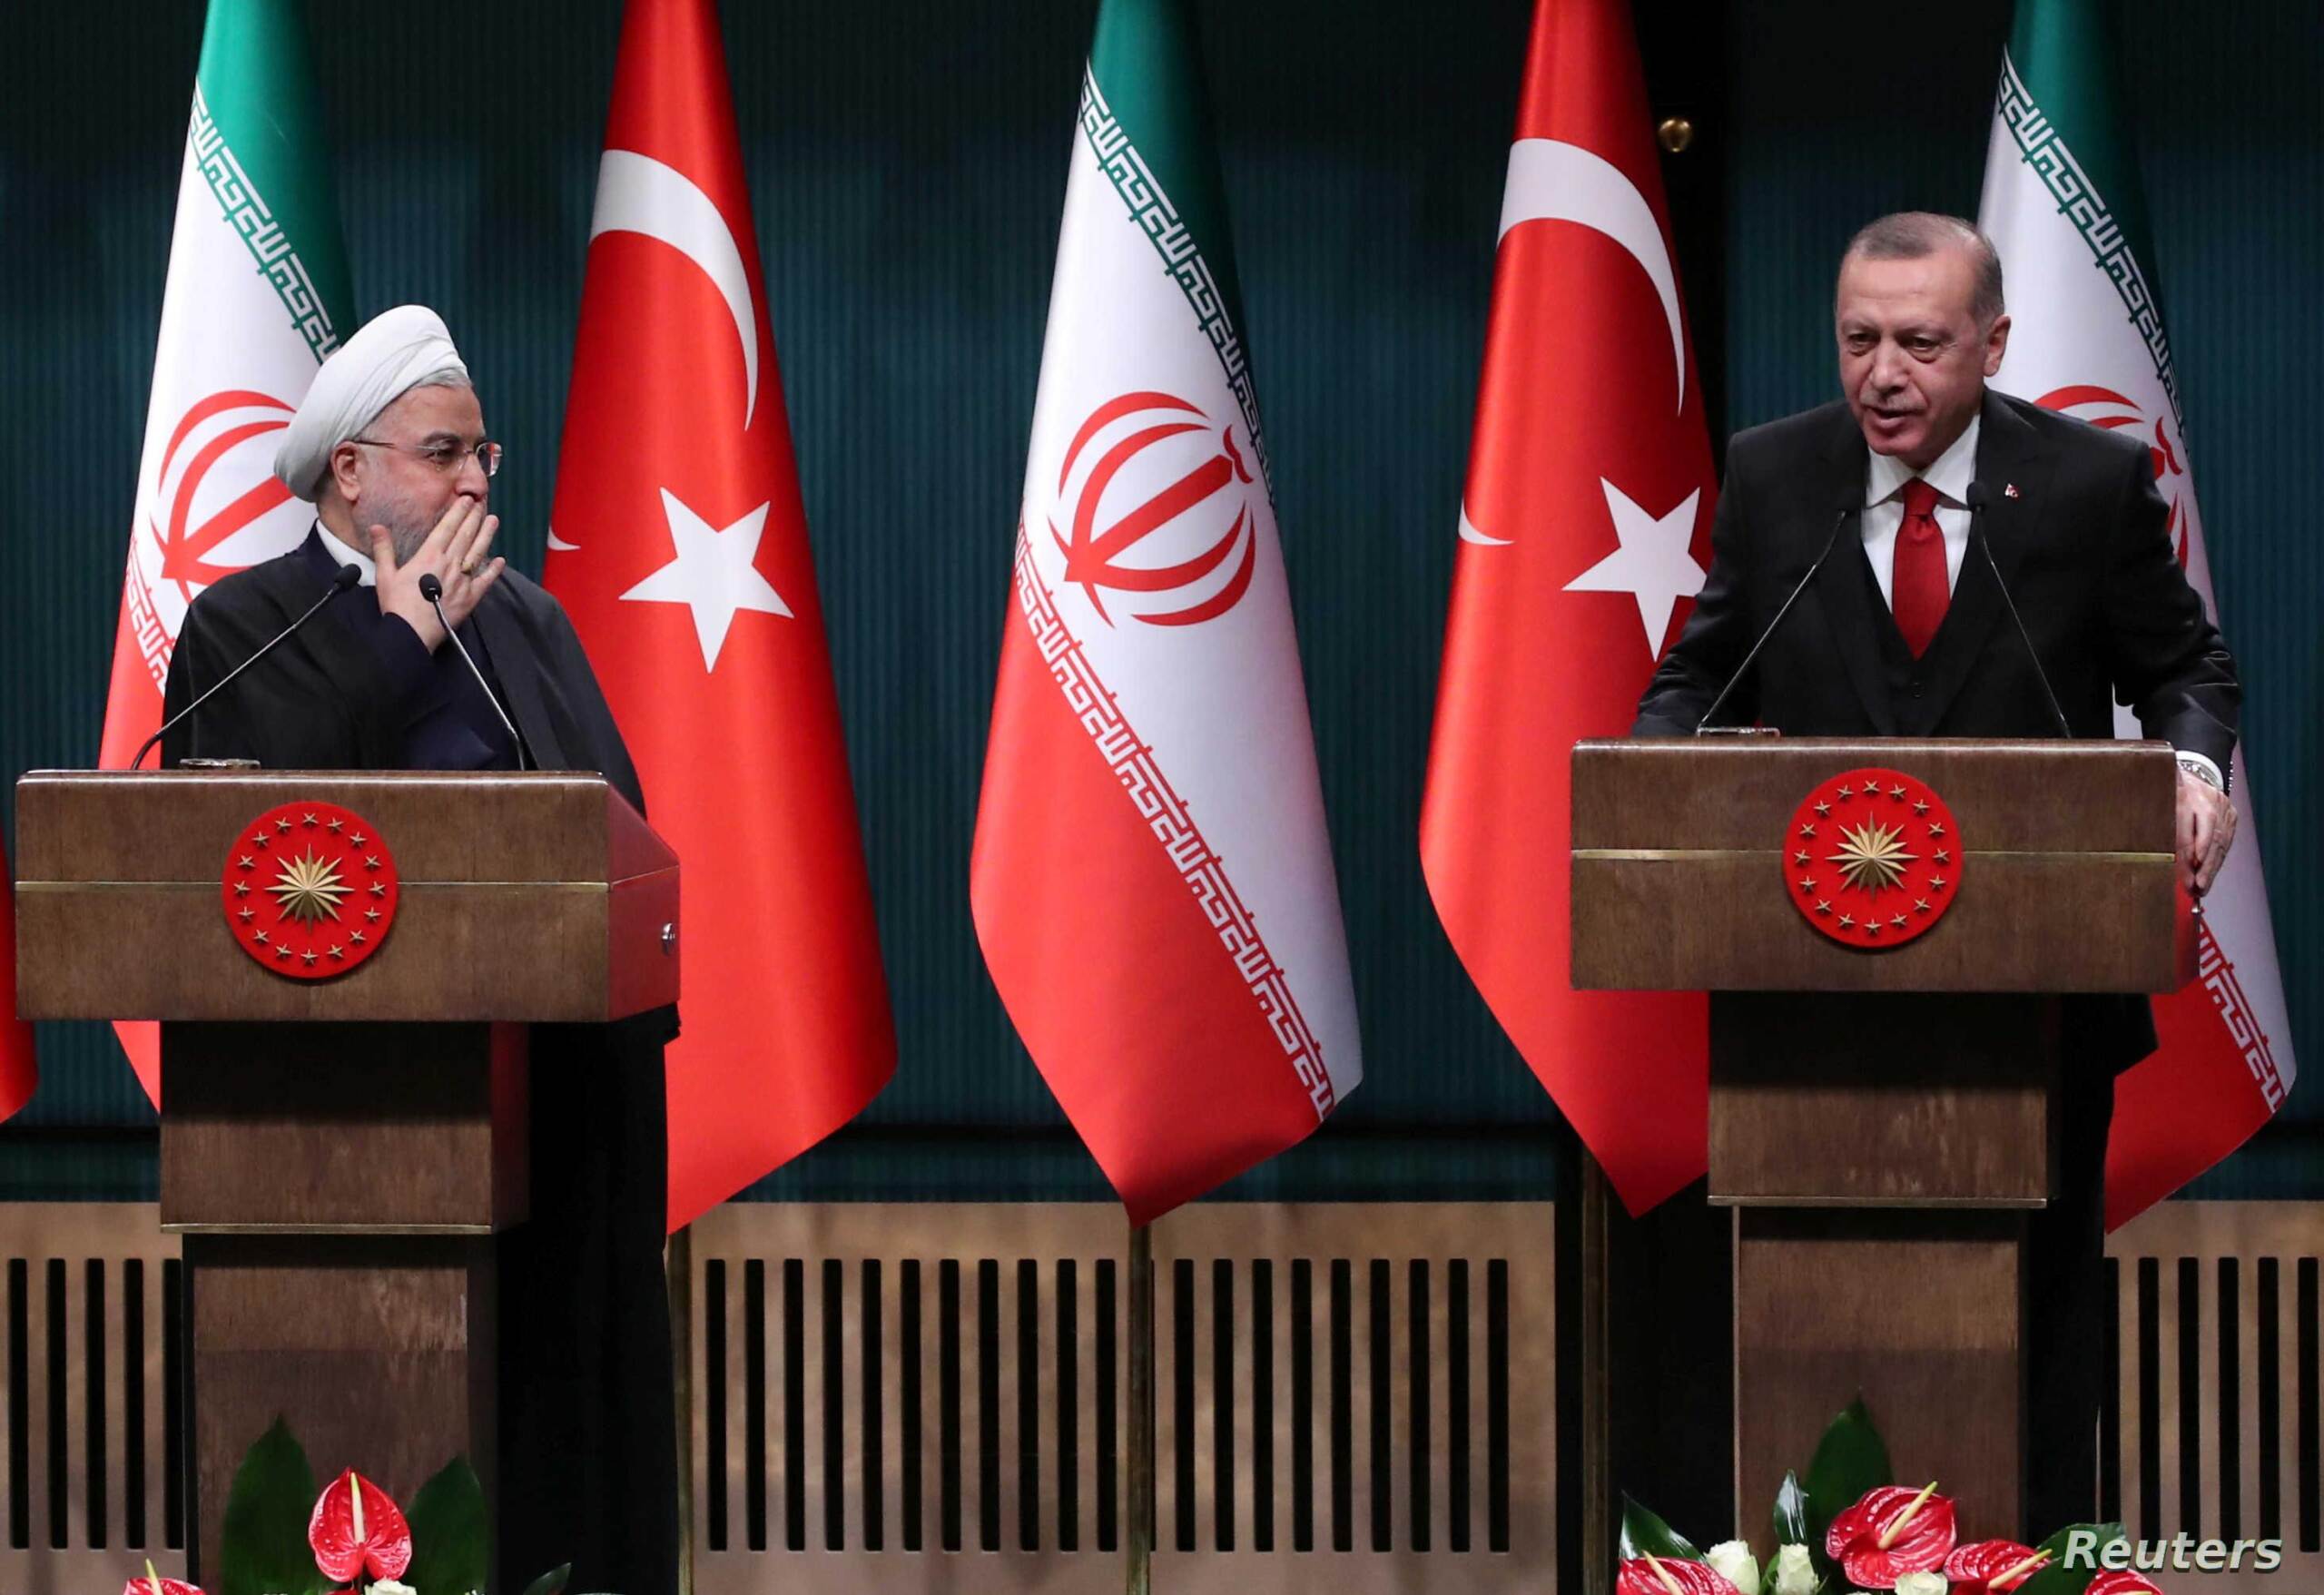 ifmat - How a poem could spark a new Iran-Turkey conflict